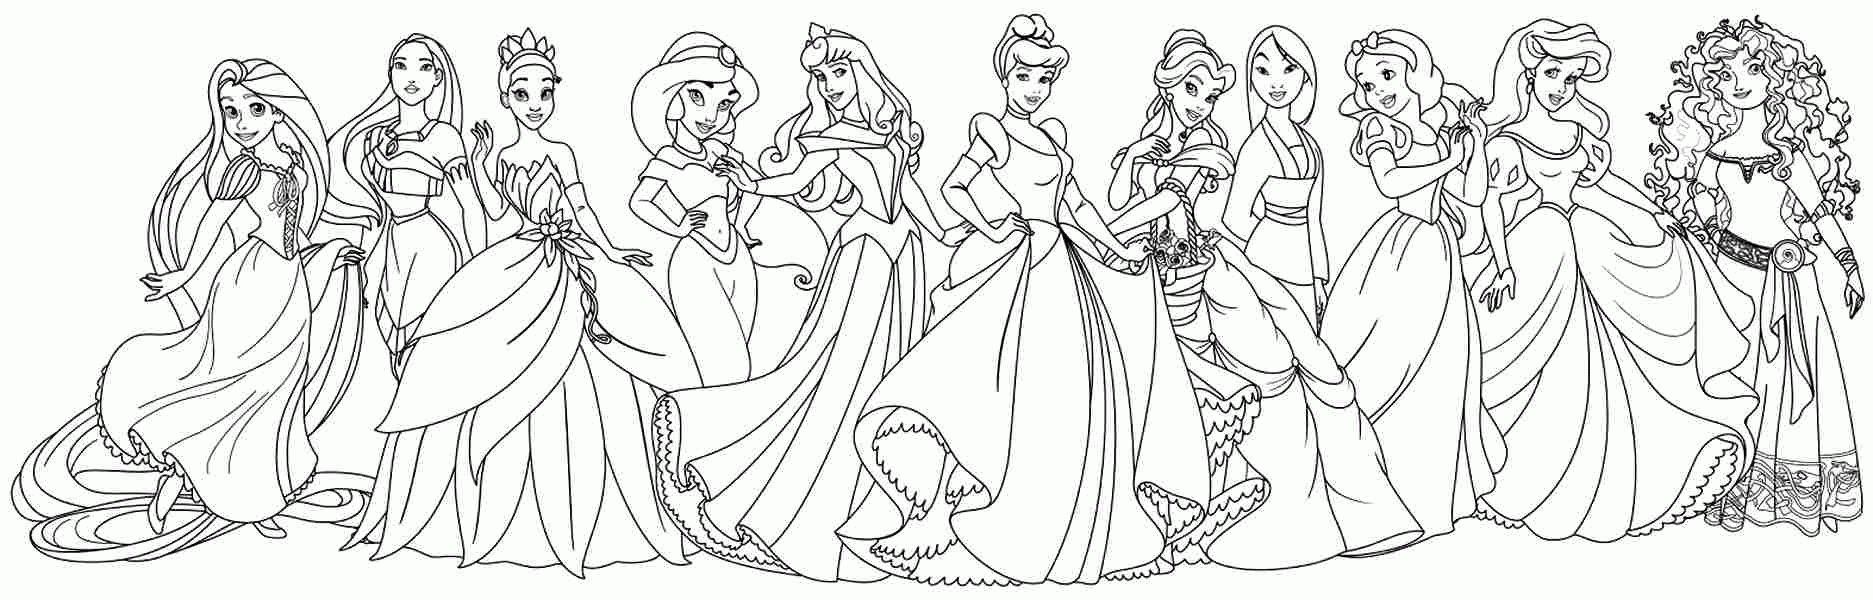 Free Printable Coloring Pages Disney Princesses - Coloring Page Photos